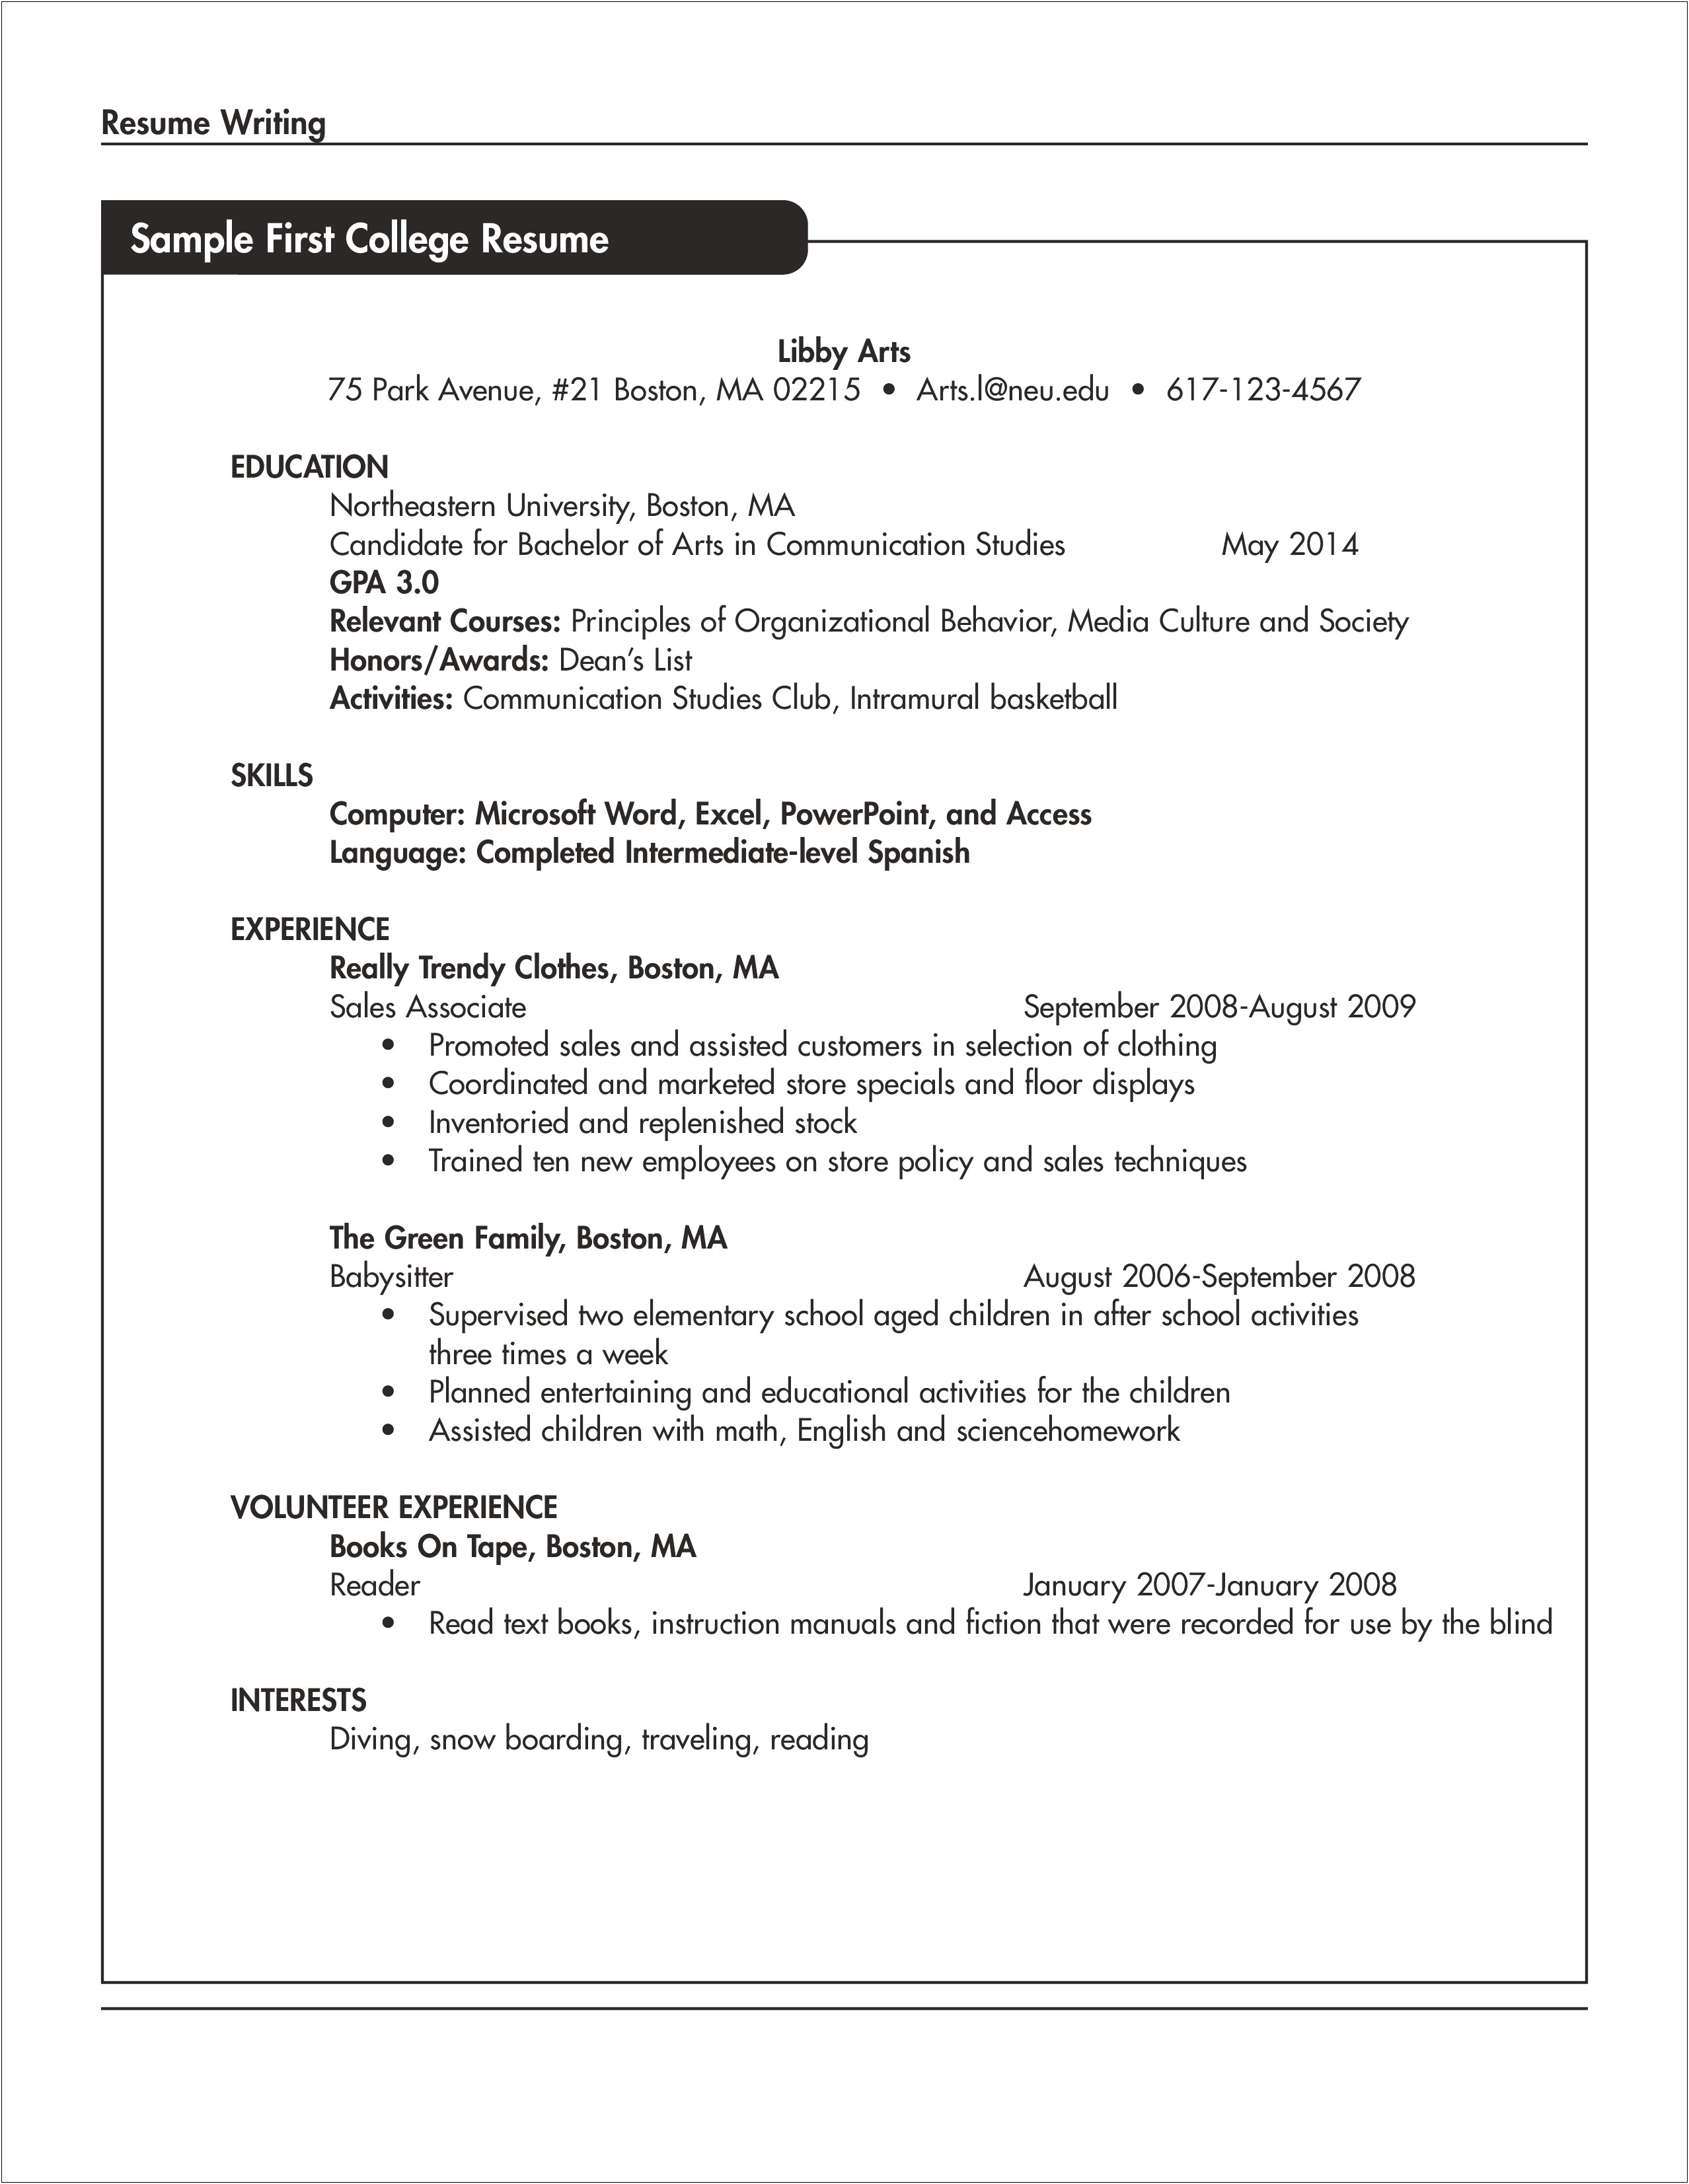 Sample Resume For Students Applying To College